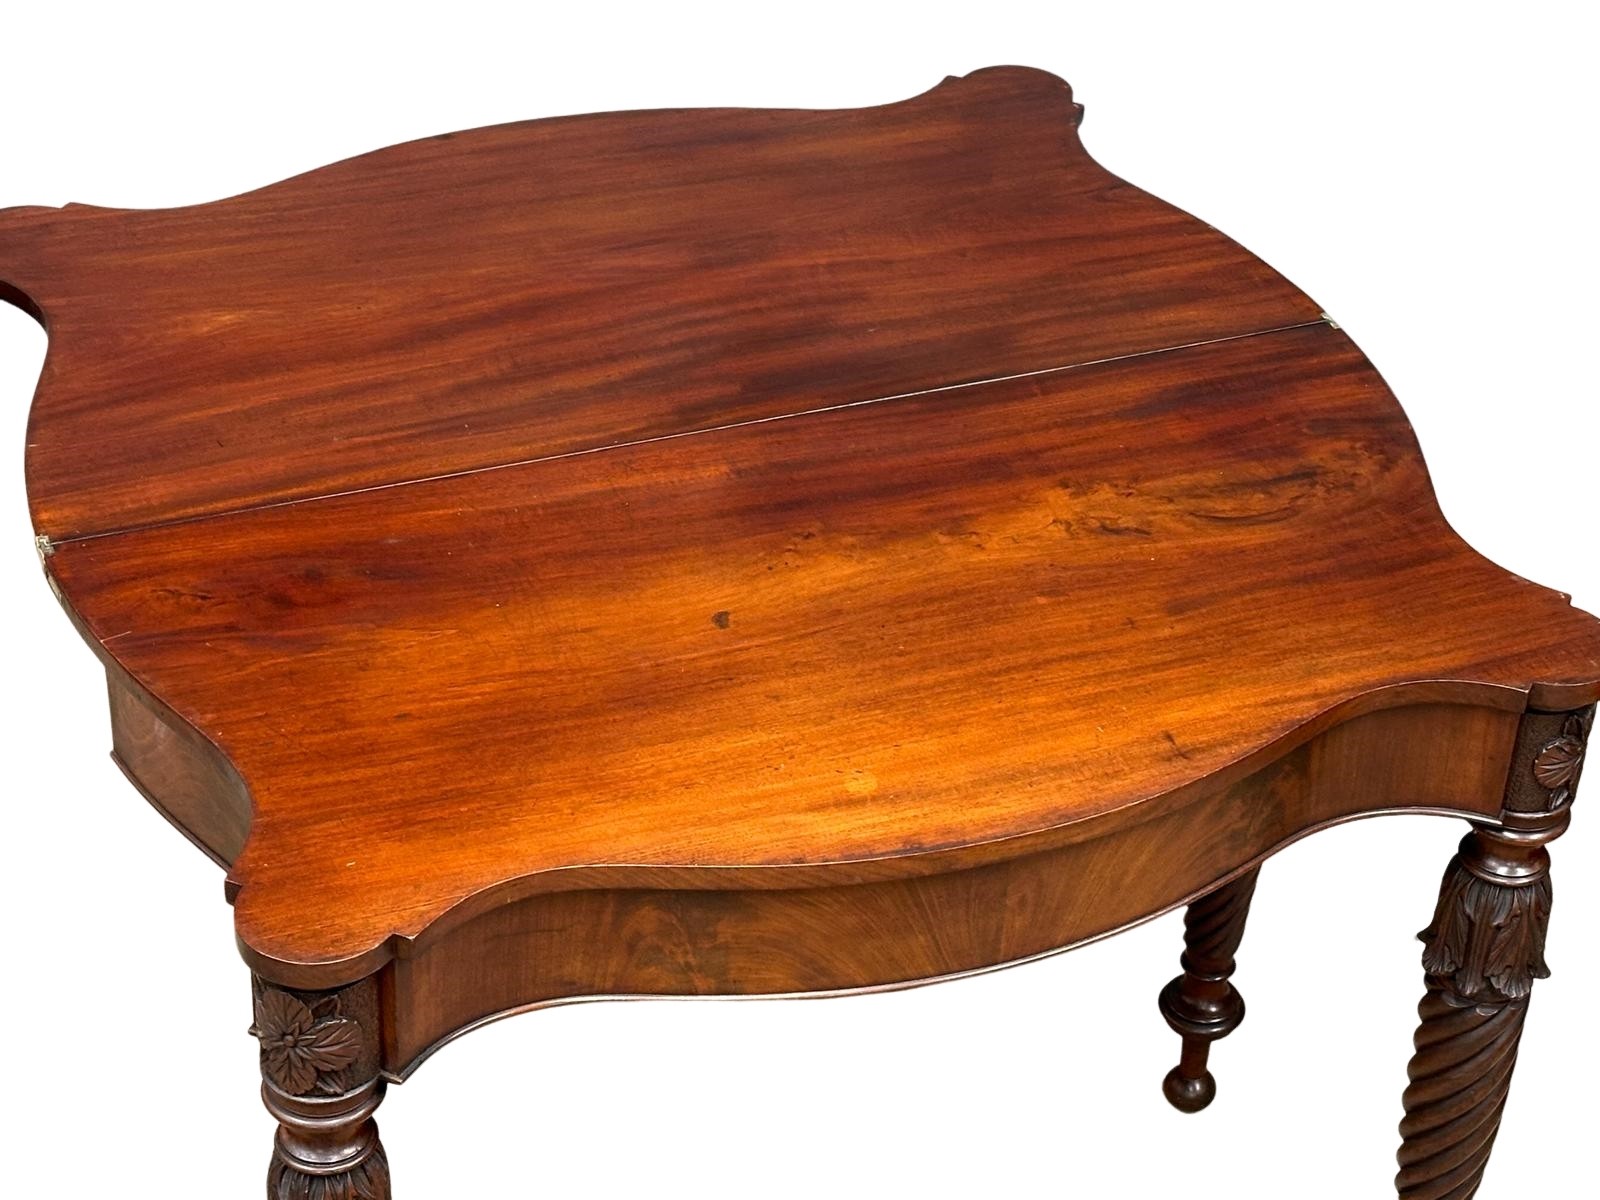 A William IV mahogany serpentine front turnover tea table on turned legs. Circa 1830. 87x44x75cm - Image 2 of 9